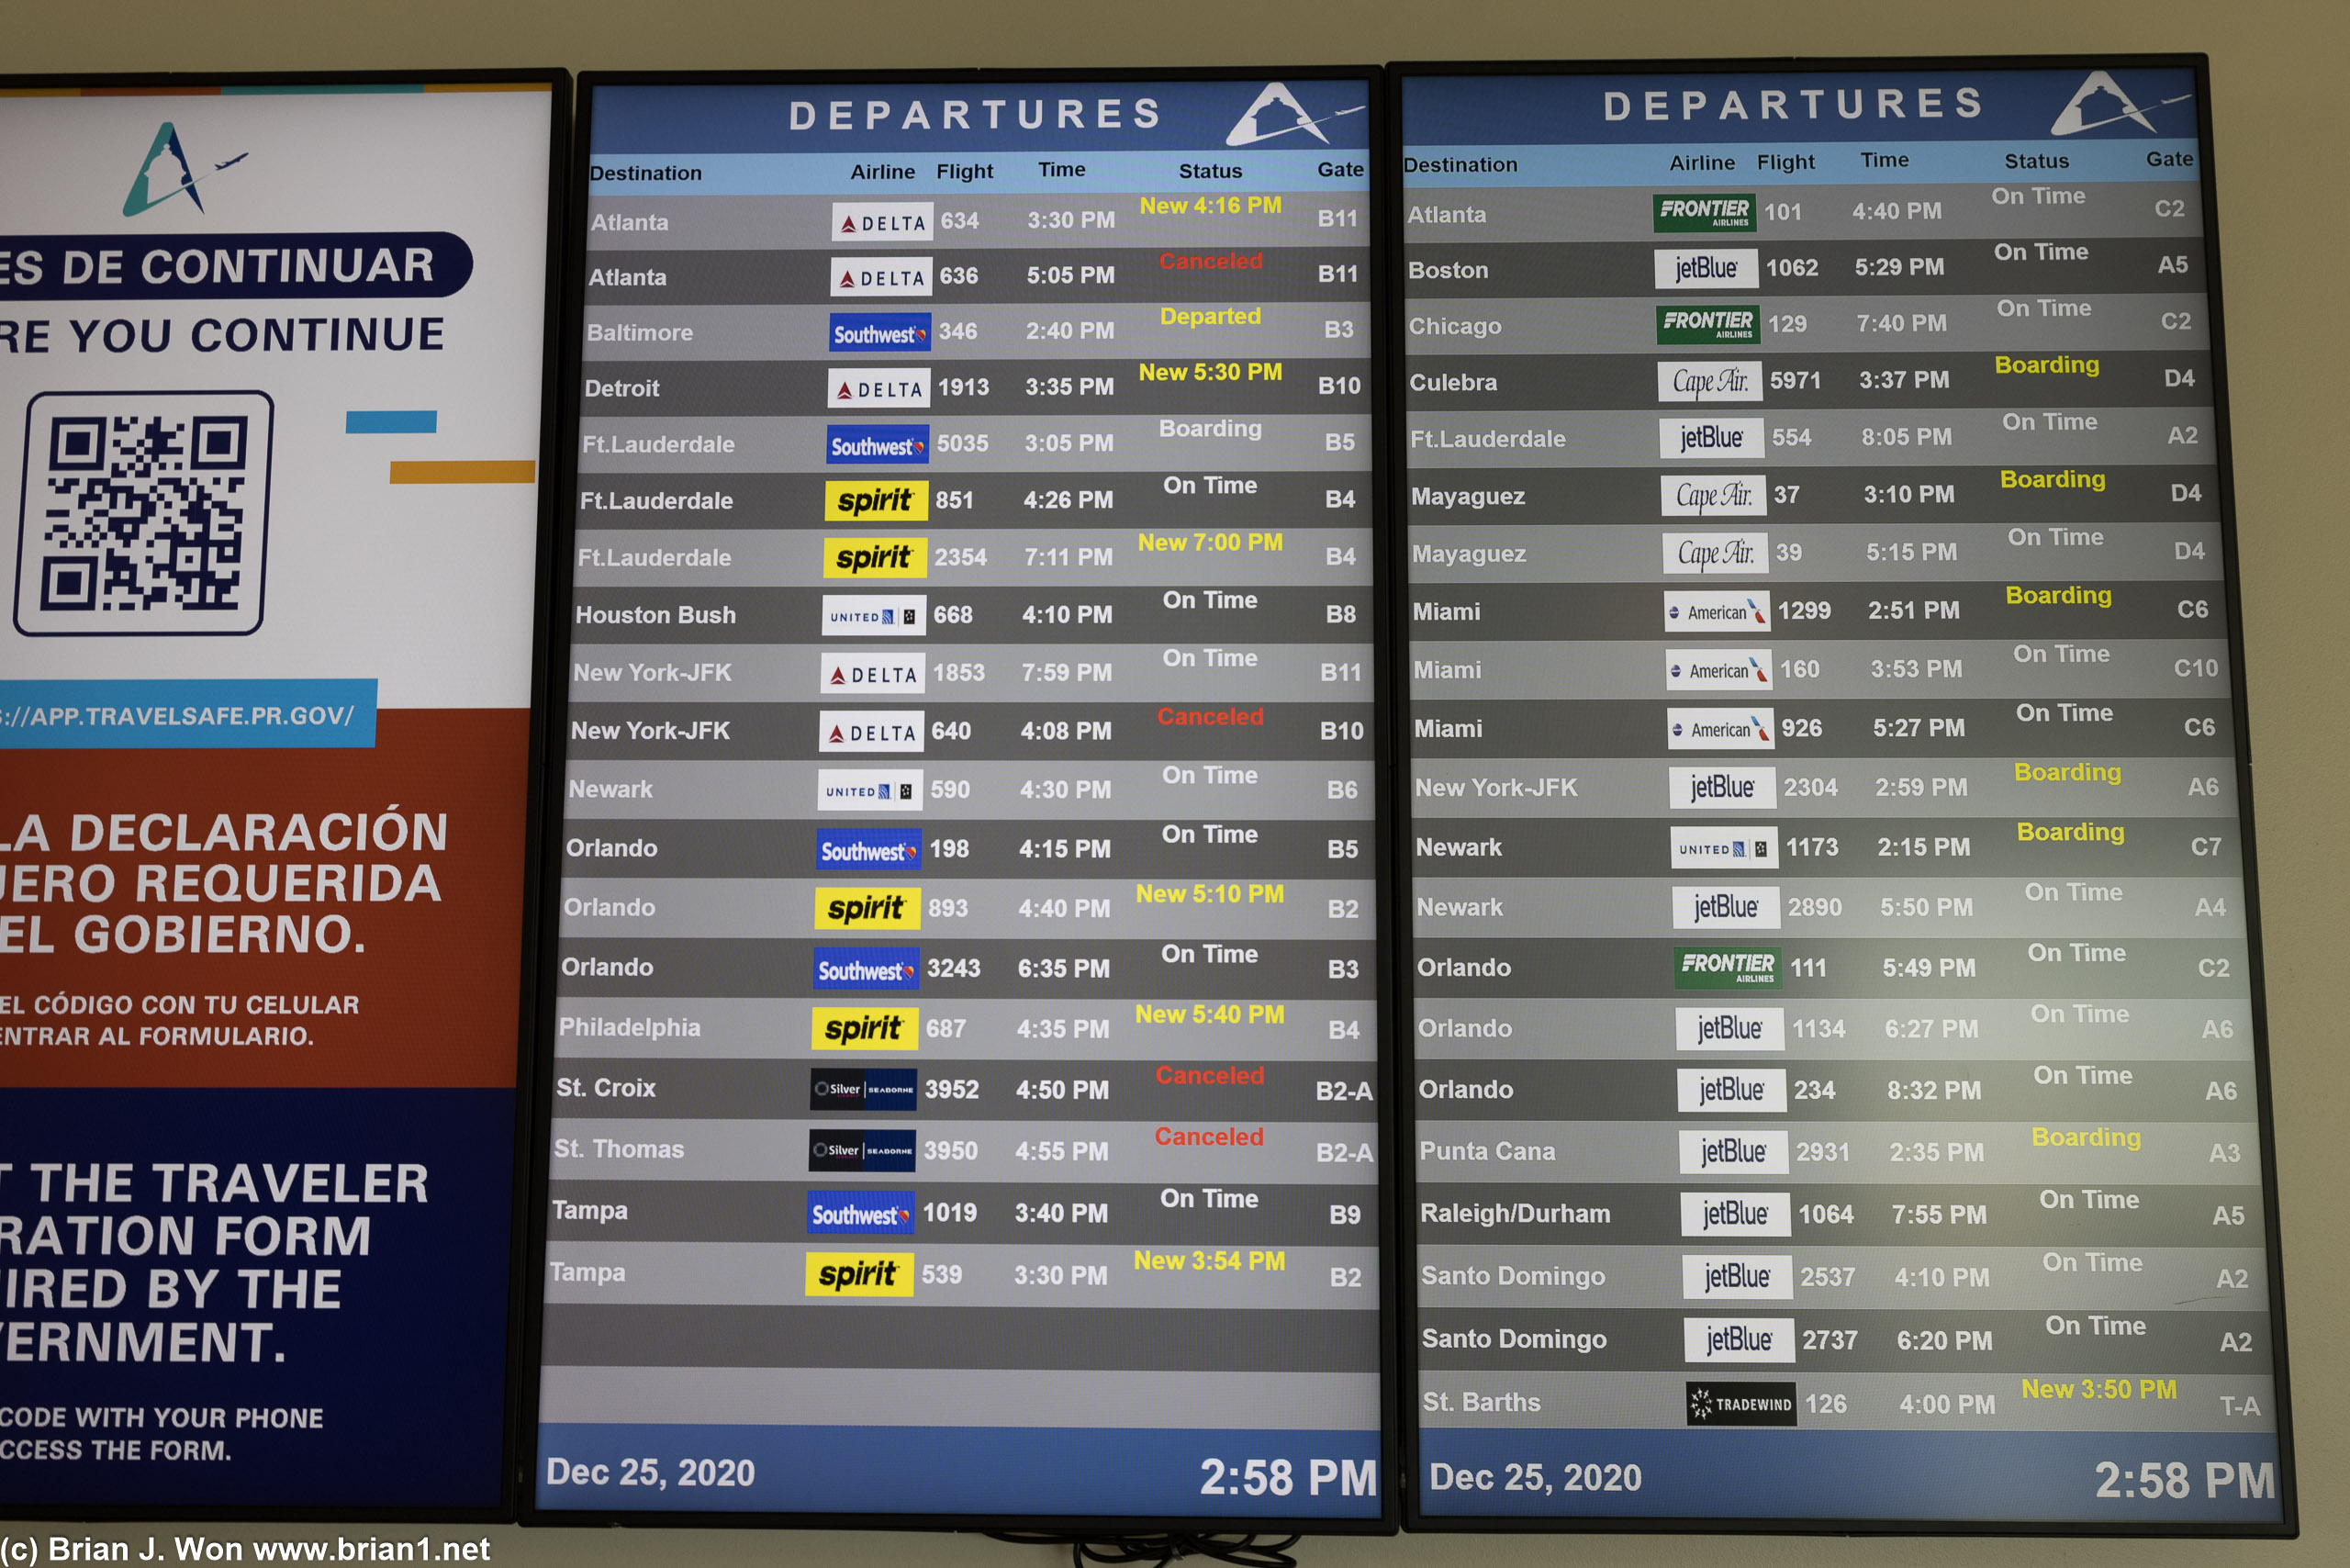 Pretty busy departures board. (also Spirit delays all over, ouch)